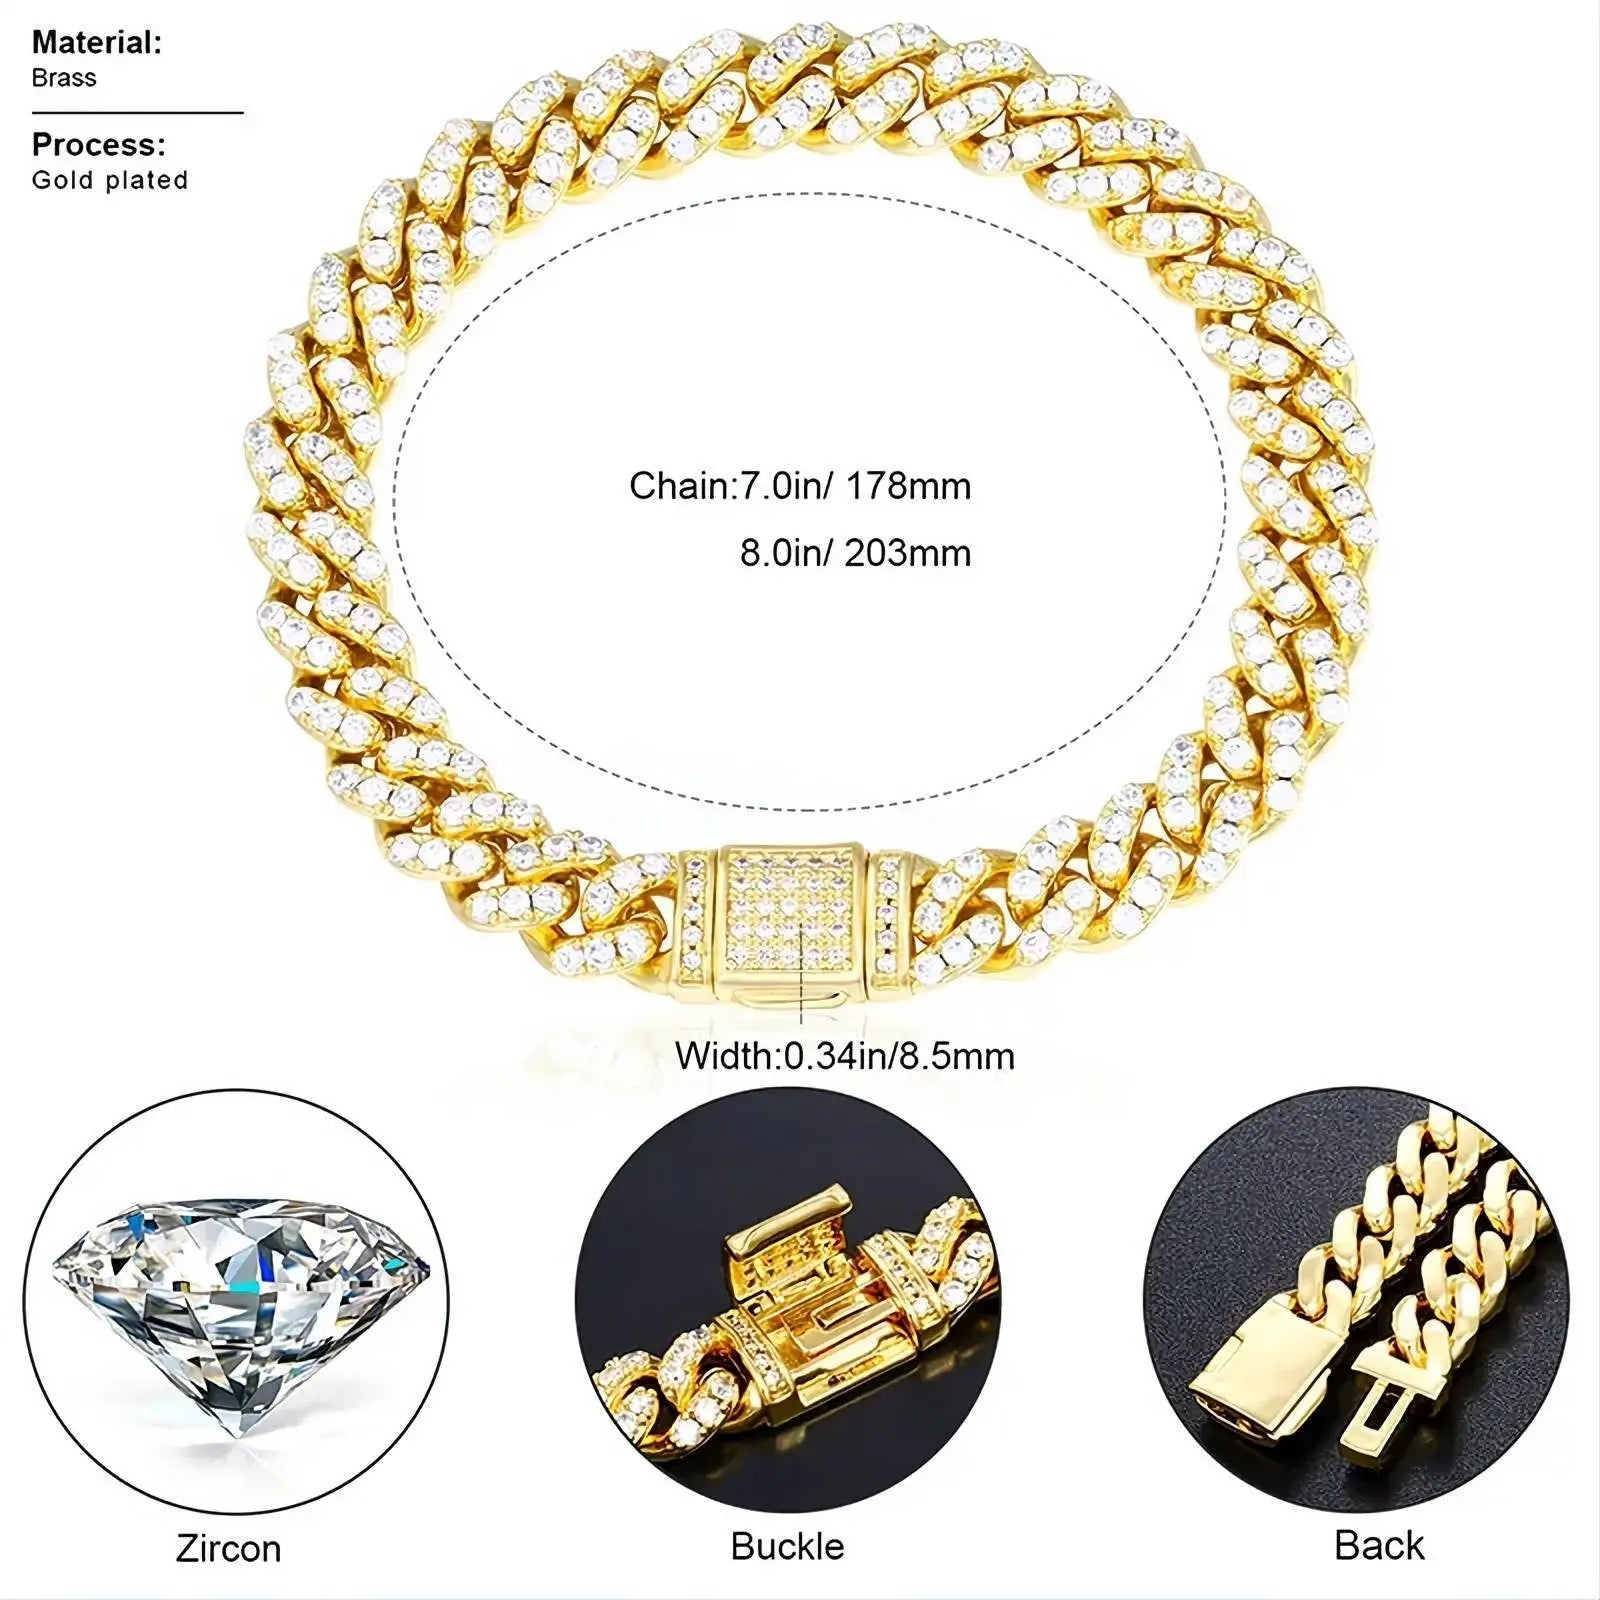 6/8mm Iced Out Chain Cuban Link Diamond Chain Bracelet 18k Gold/White/Rose Gold Plated Miami Bling Drip Chains and Bracelets JettsJewelers